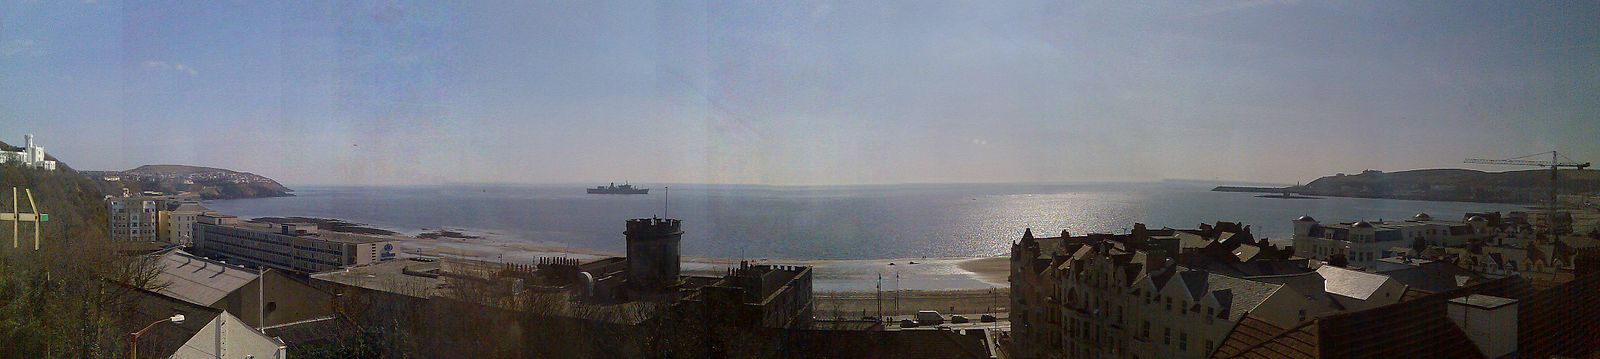 View of the bay showing visible landmarks of the Castle Mona hotel staircase turret (centre) and Onchan Head to left